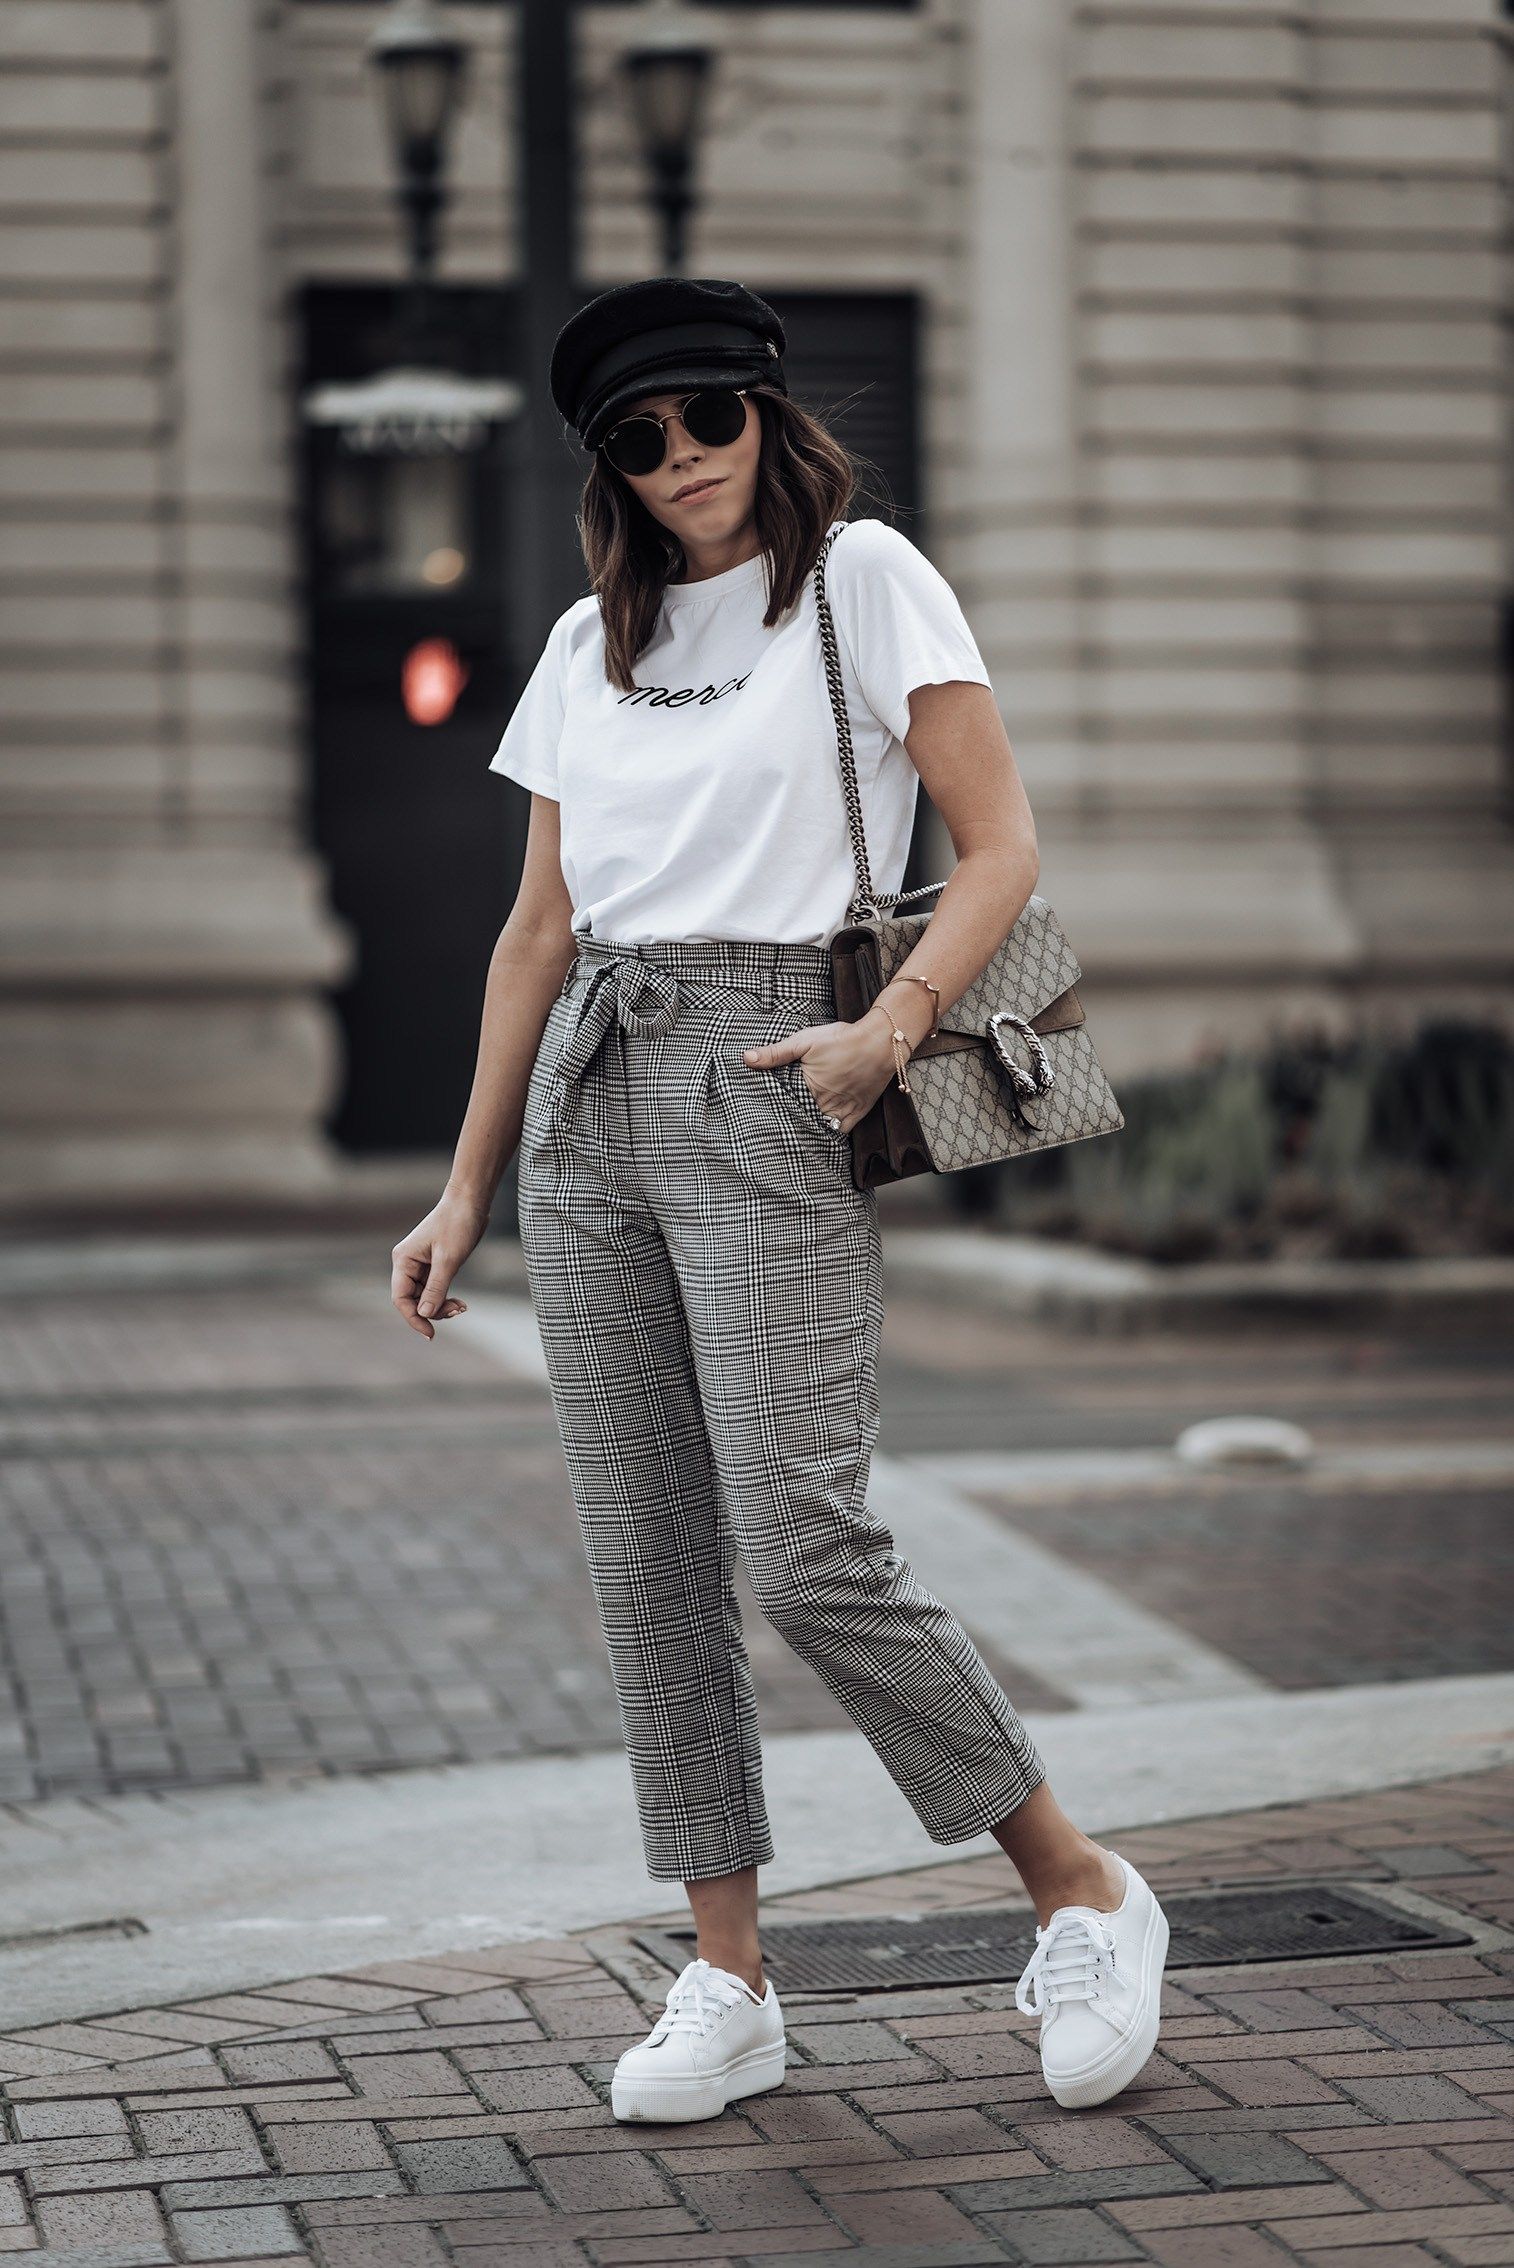 Printed Pants With Grey-White Sneakers
Outfit